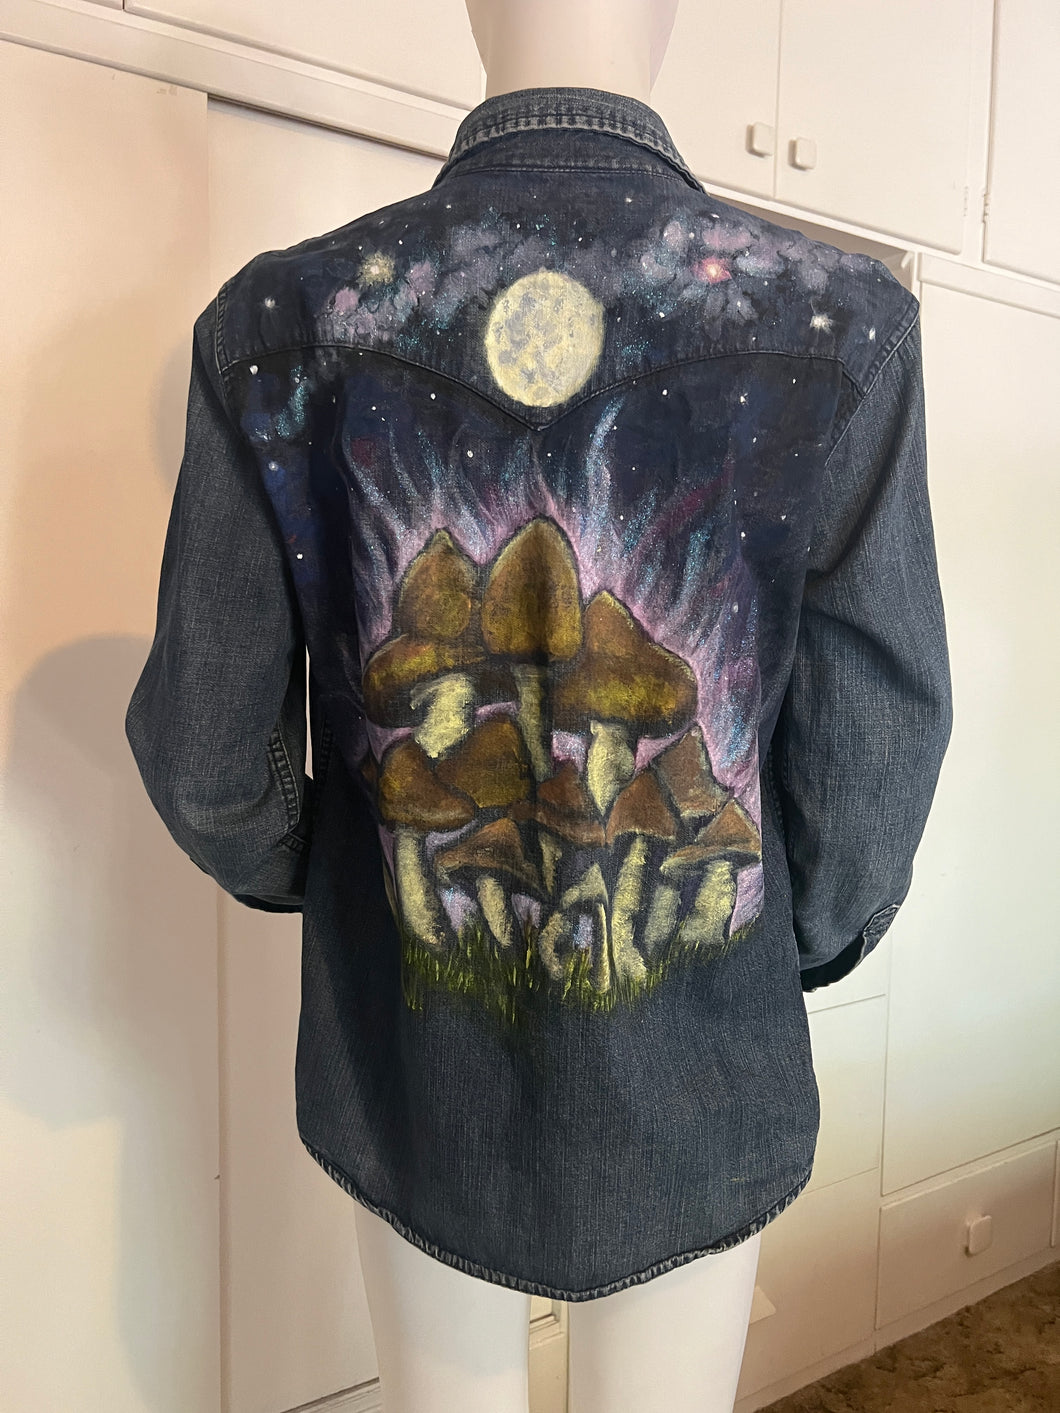 Moonlight Magic Mushrooms by Nicole Young, Hand-painted Levi's Snap-front Denim Shirt, Men's M